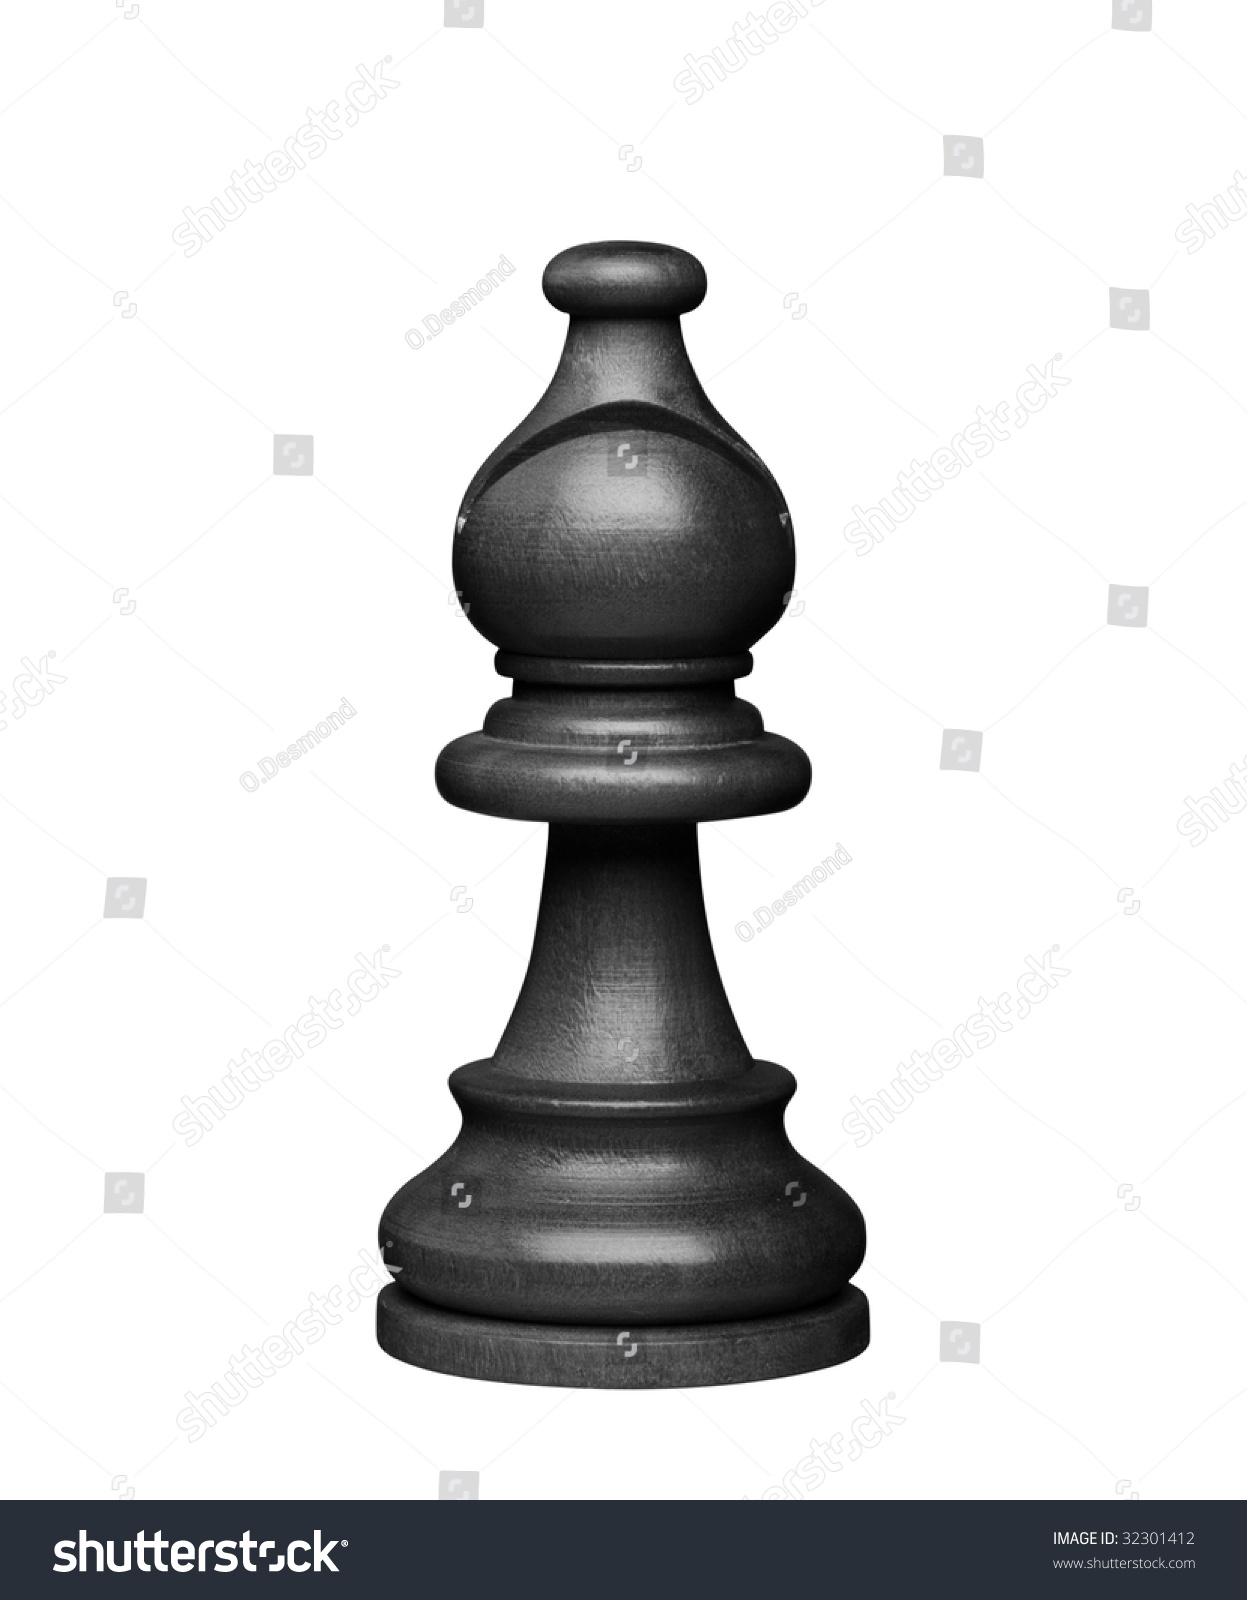 Black Bishop Chess Figure (+Clipping Path, High Resolution) Stock Photo ...